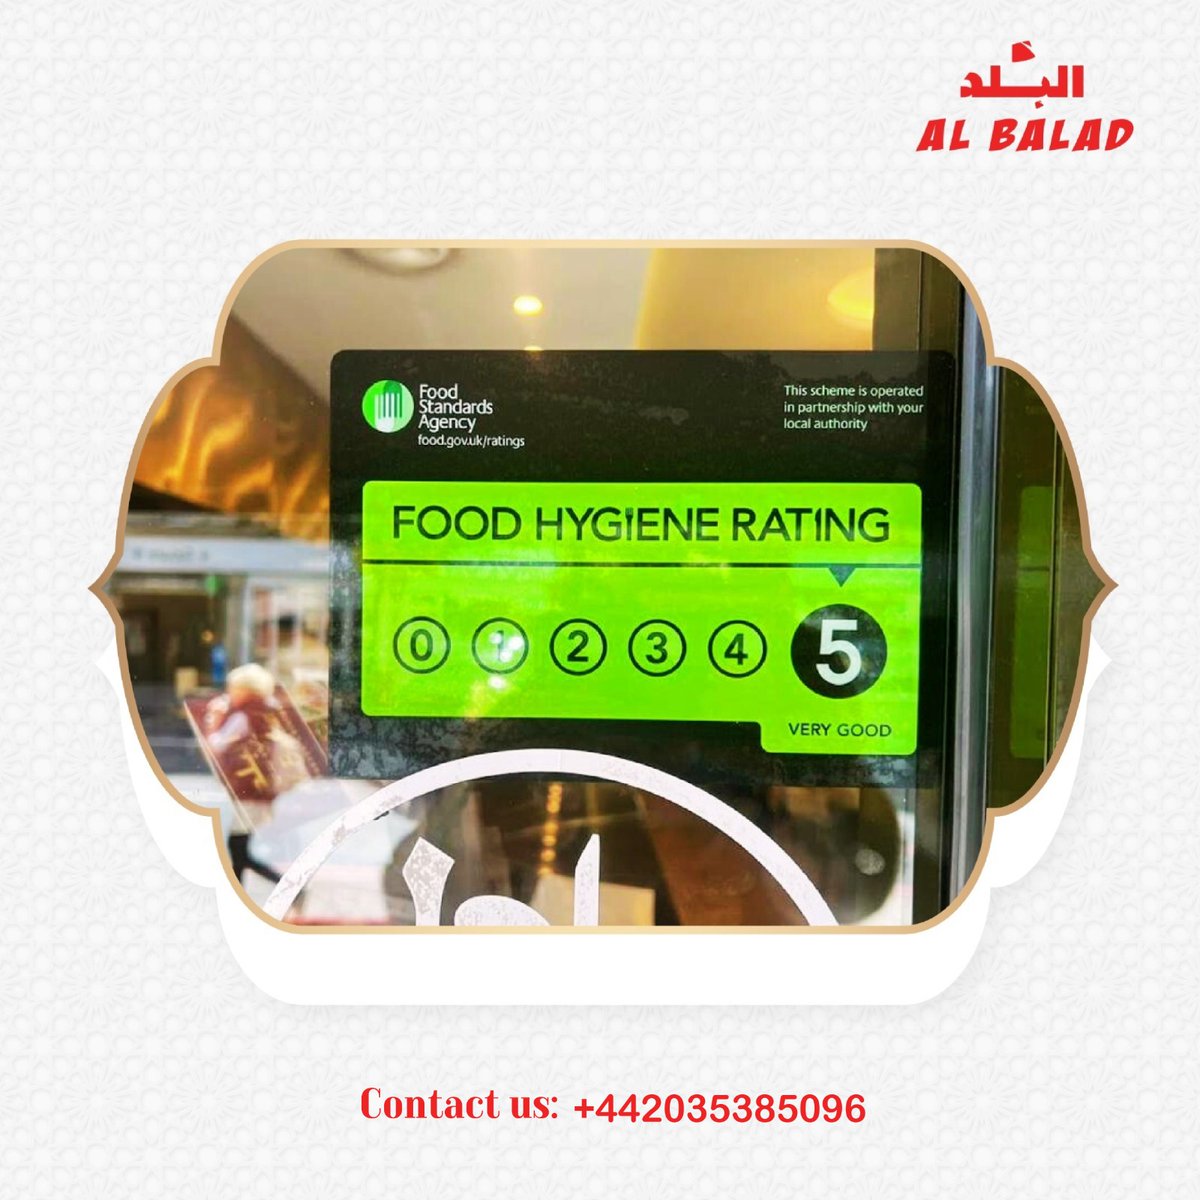 Are you scared of the cleanliness and safety of the restaurants you dine in? Be reassured, our restaurant was rated 5 by the food standards agency.☑️ So, you can be safe with us 🥰 'From Lebanon to London with love'❤️ #lebaneserestaurant #lebanesecusiene #Topfood #foodie #food